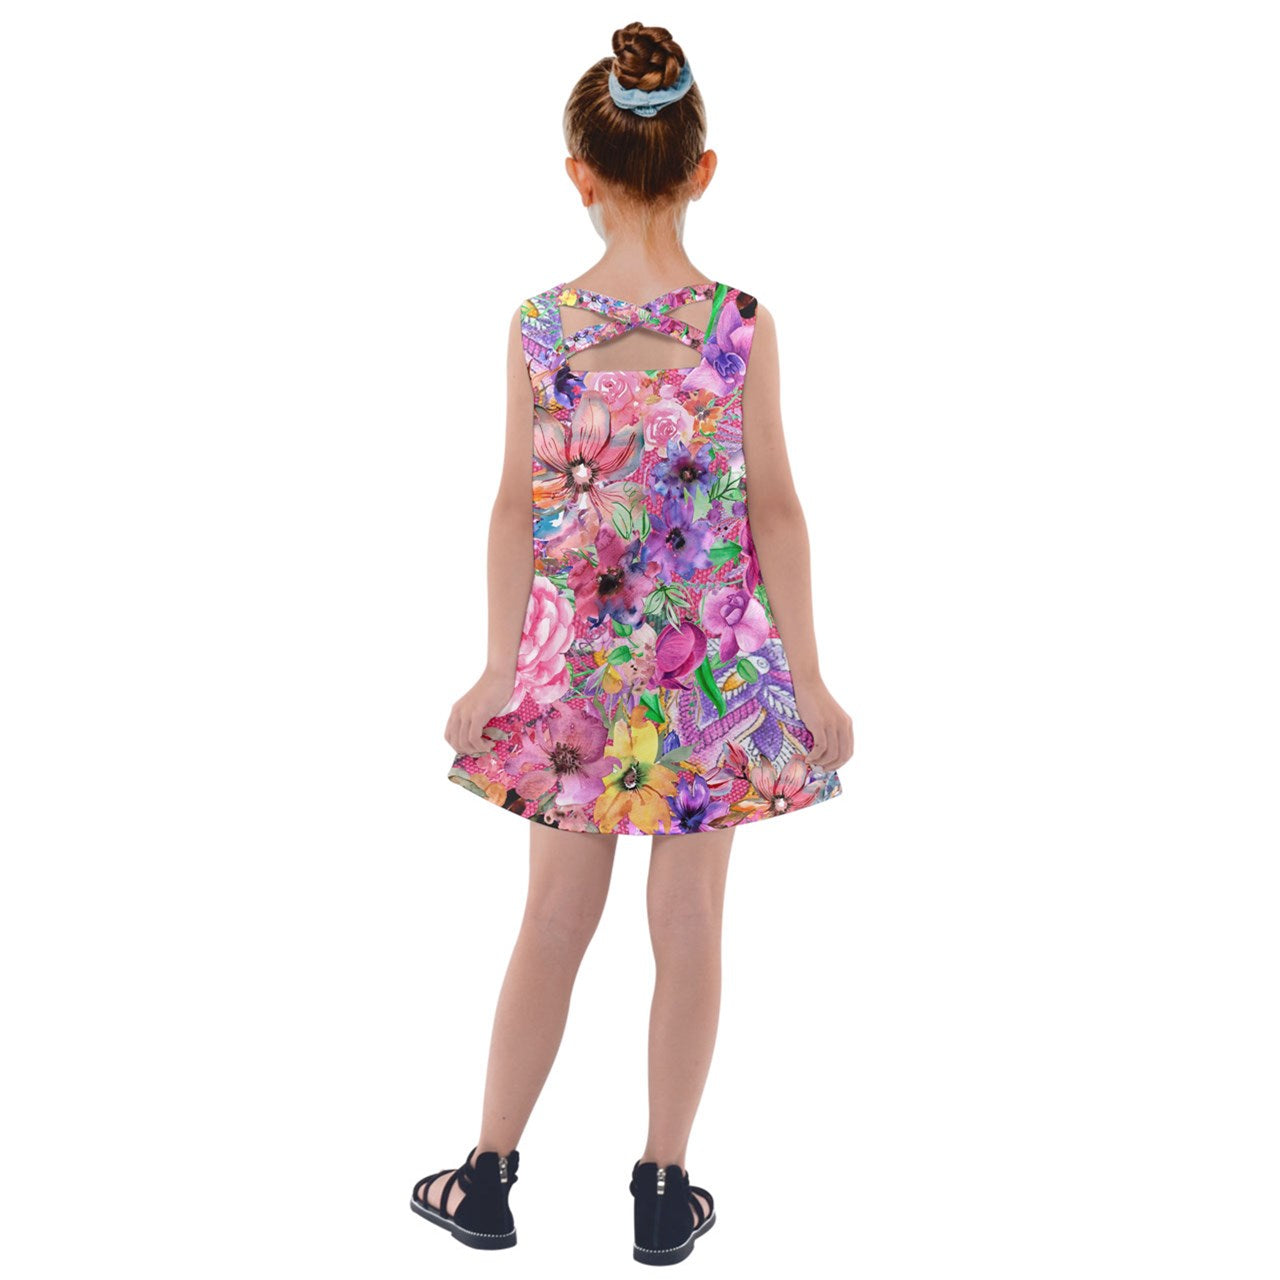 Nothing but Floral Kids' Cross Back Dress